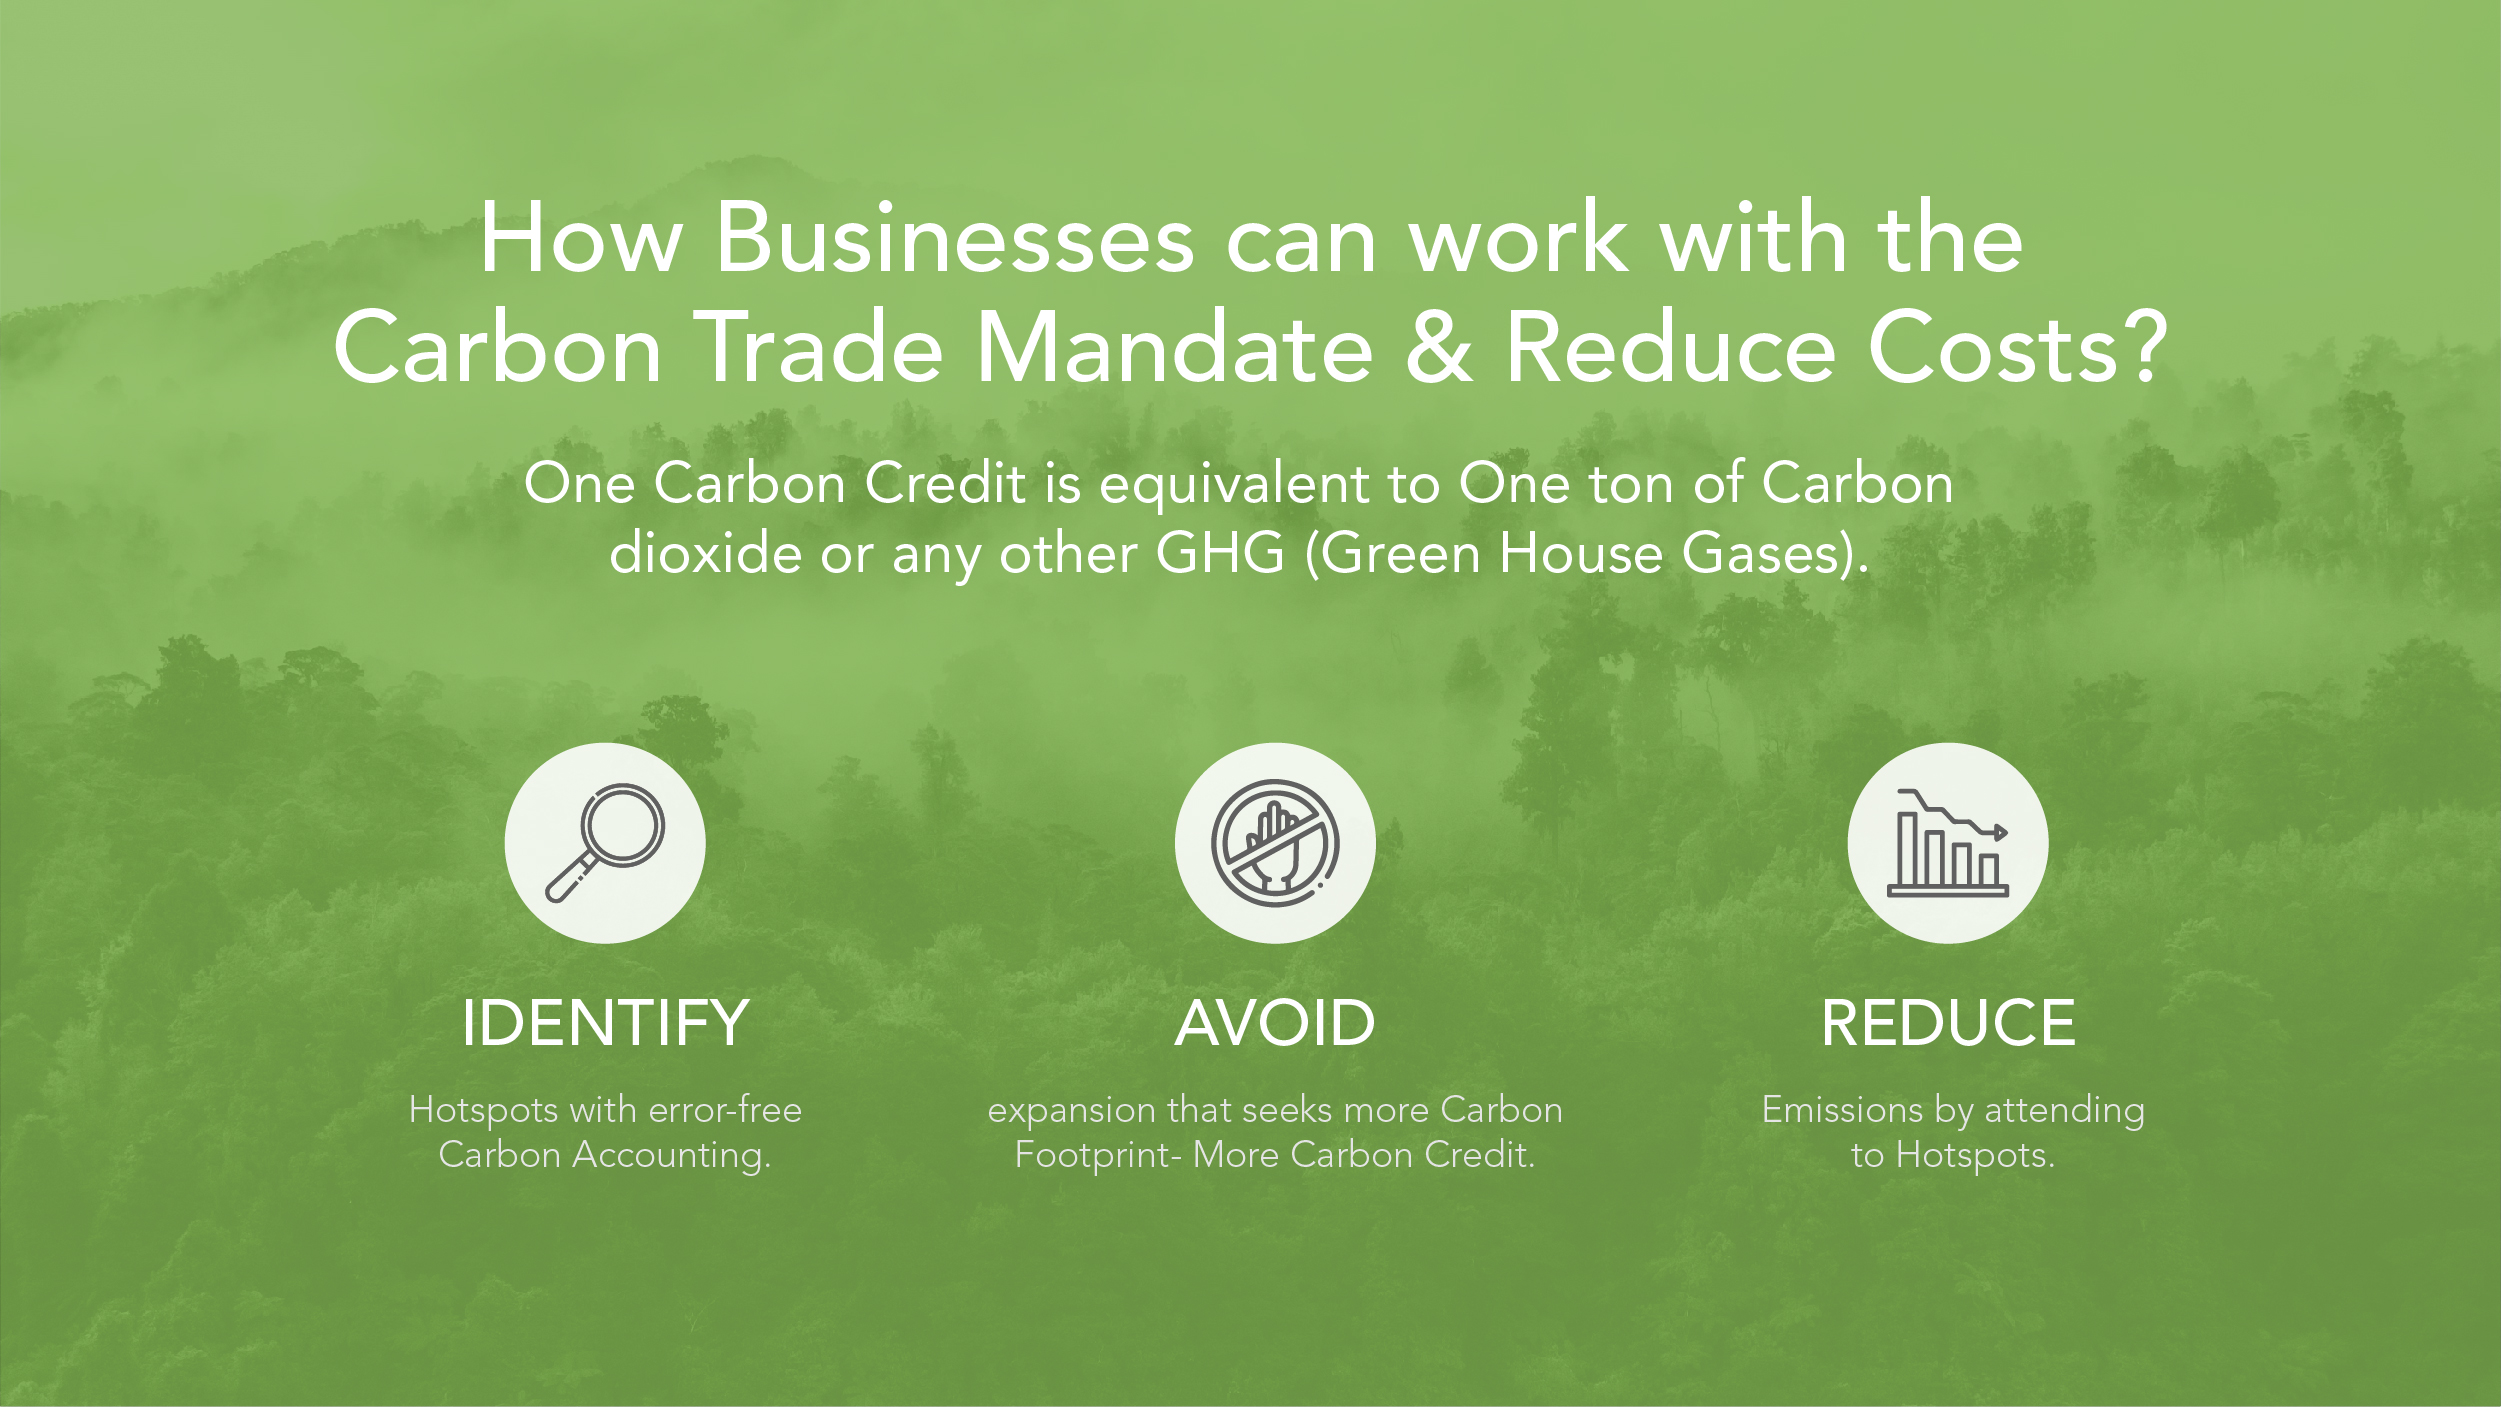 How Businesses Can Work with the Carbon Trade Mandate Reduce Costs